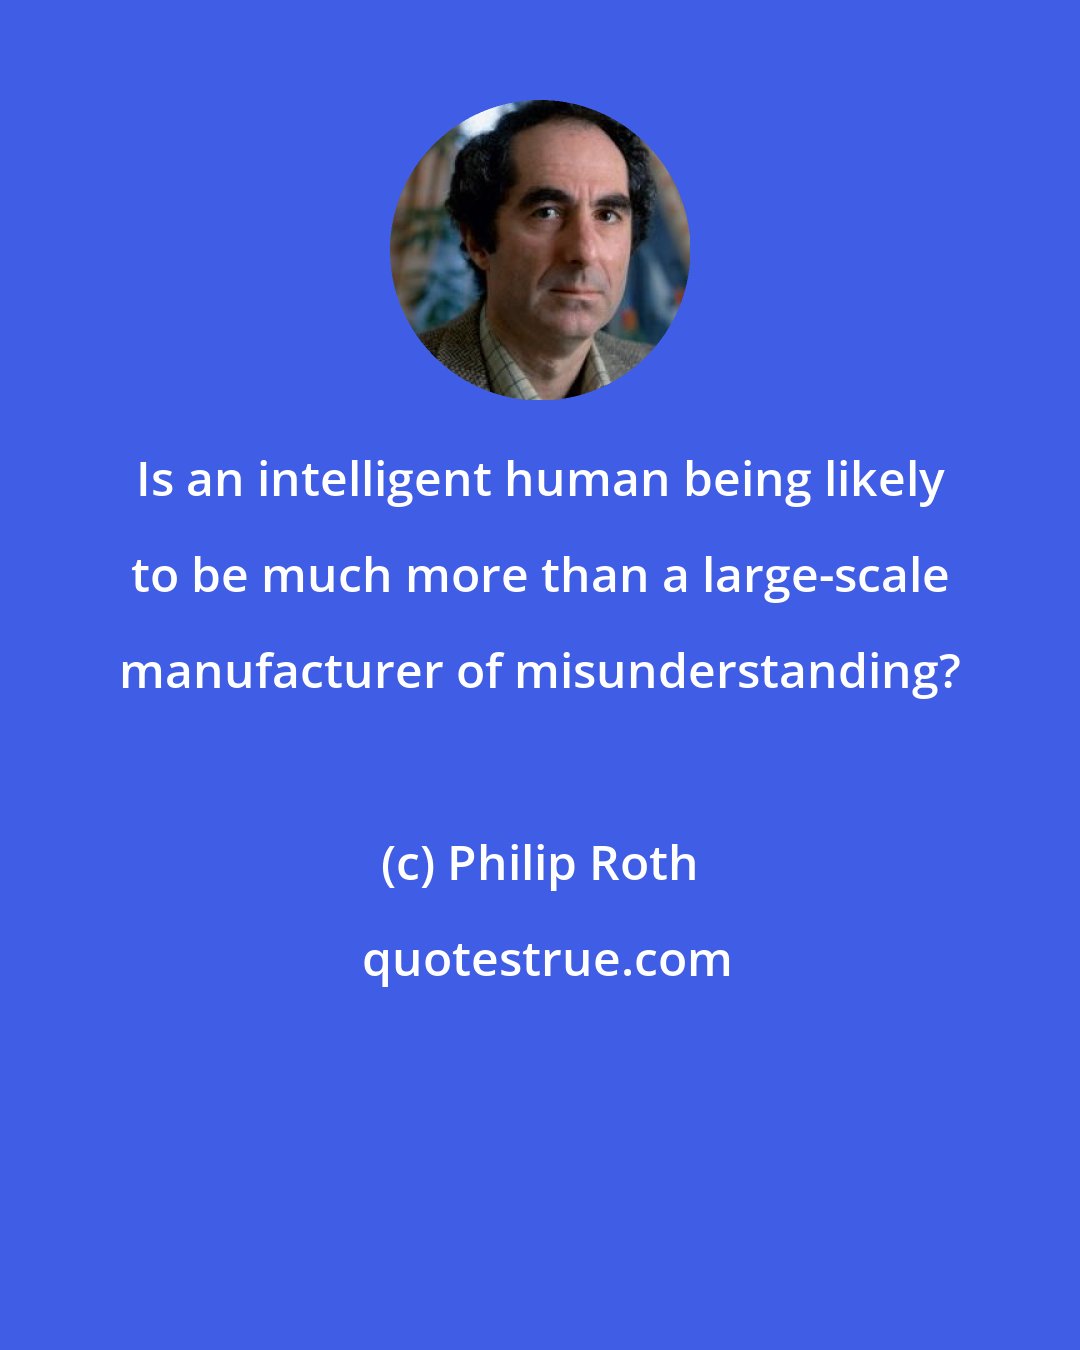 Philip Roth: Is an intelligent human being likely to be much more than a large-scale manufacturer of misunderstanding?